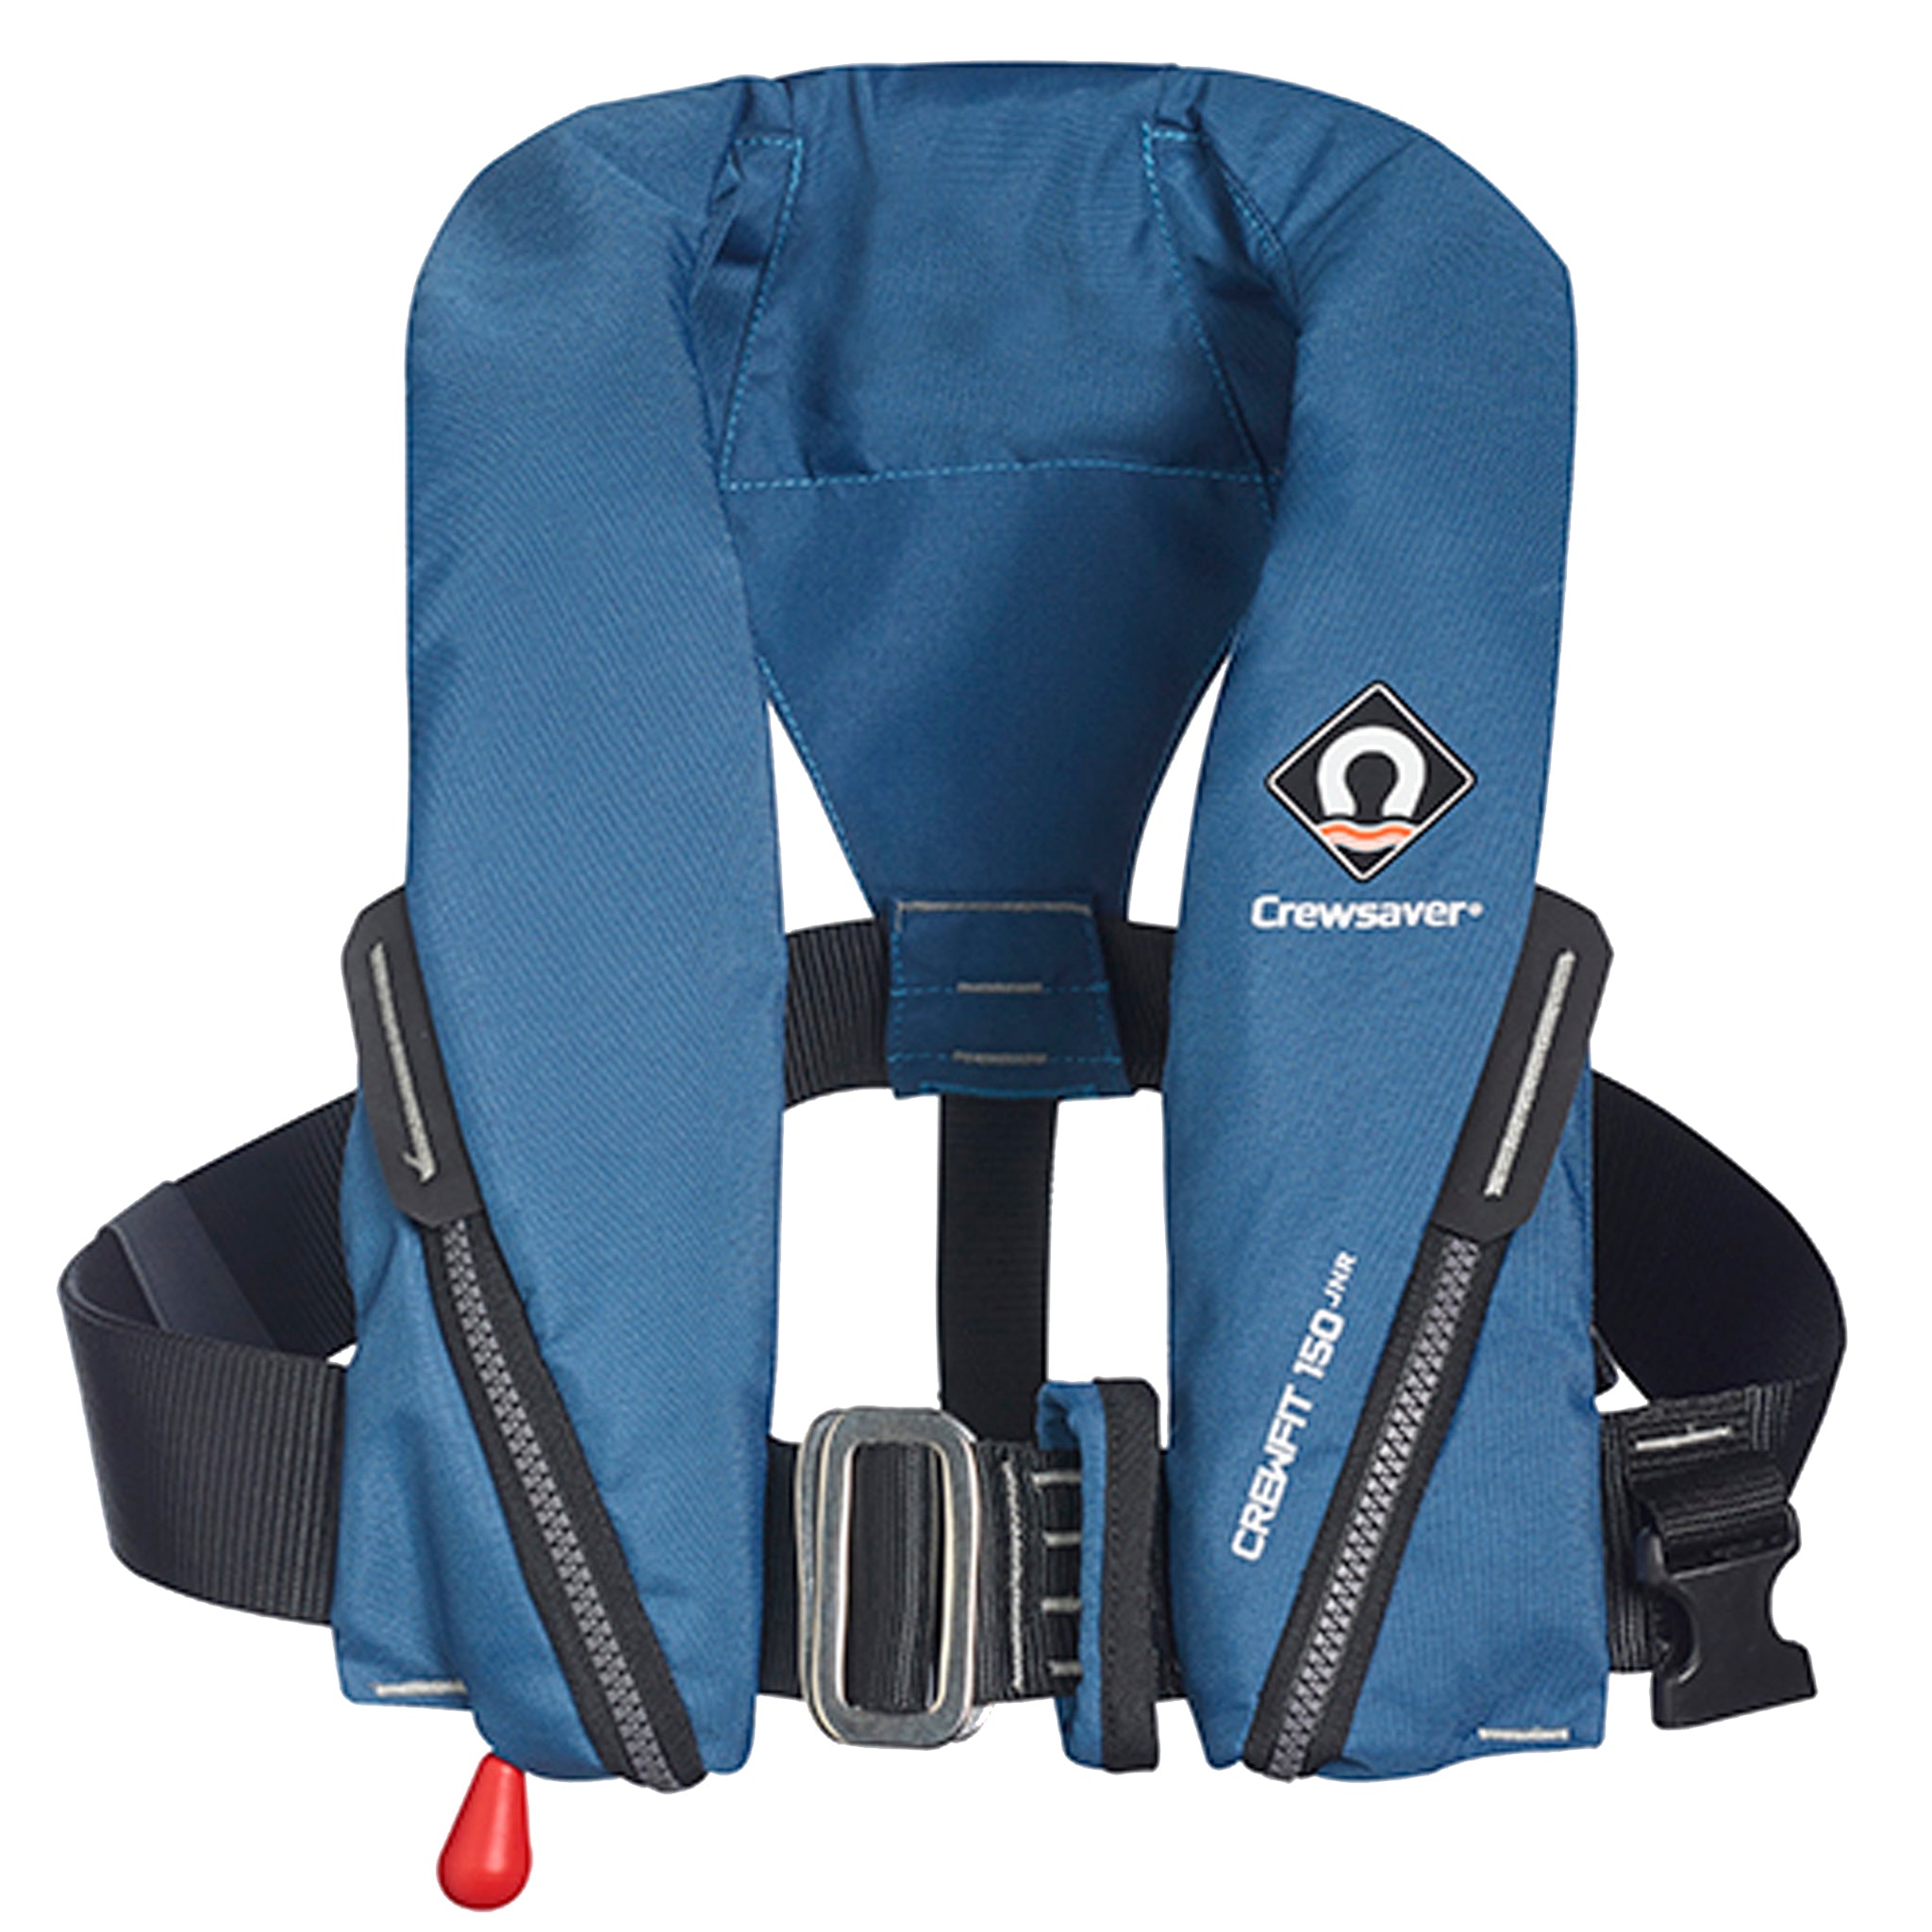 Crewsaver Crewfit Junior Auto Lifejacket 150N with Harness 